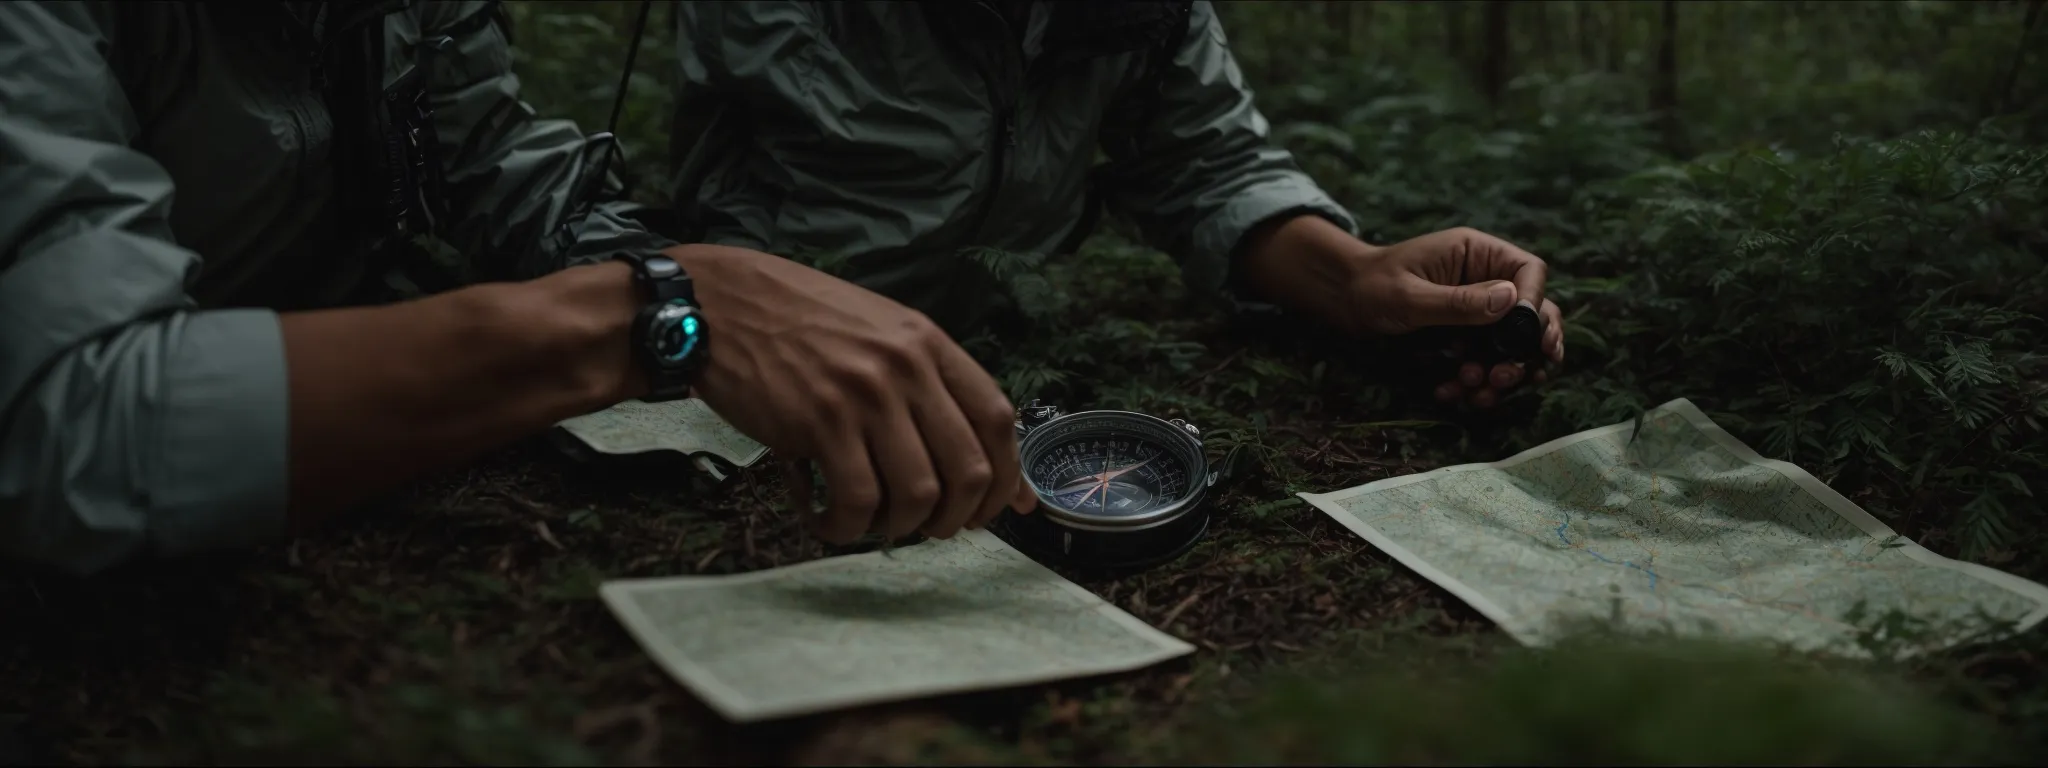 a person using a compass and map to navigate through a forest, symbolizing strategic direction in seo.